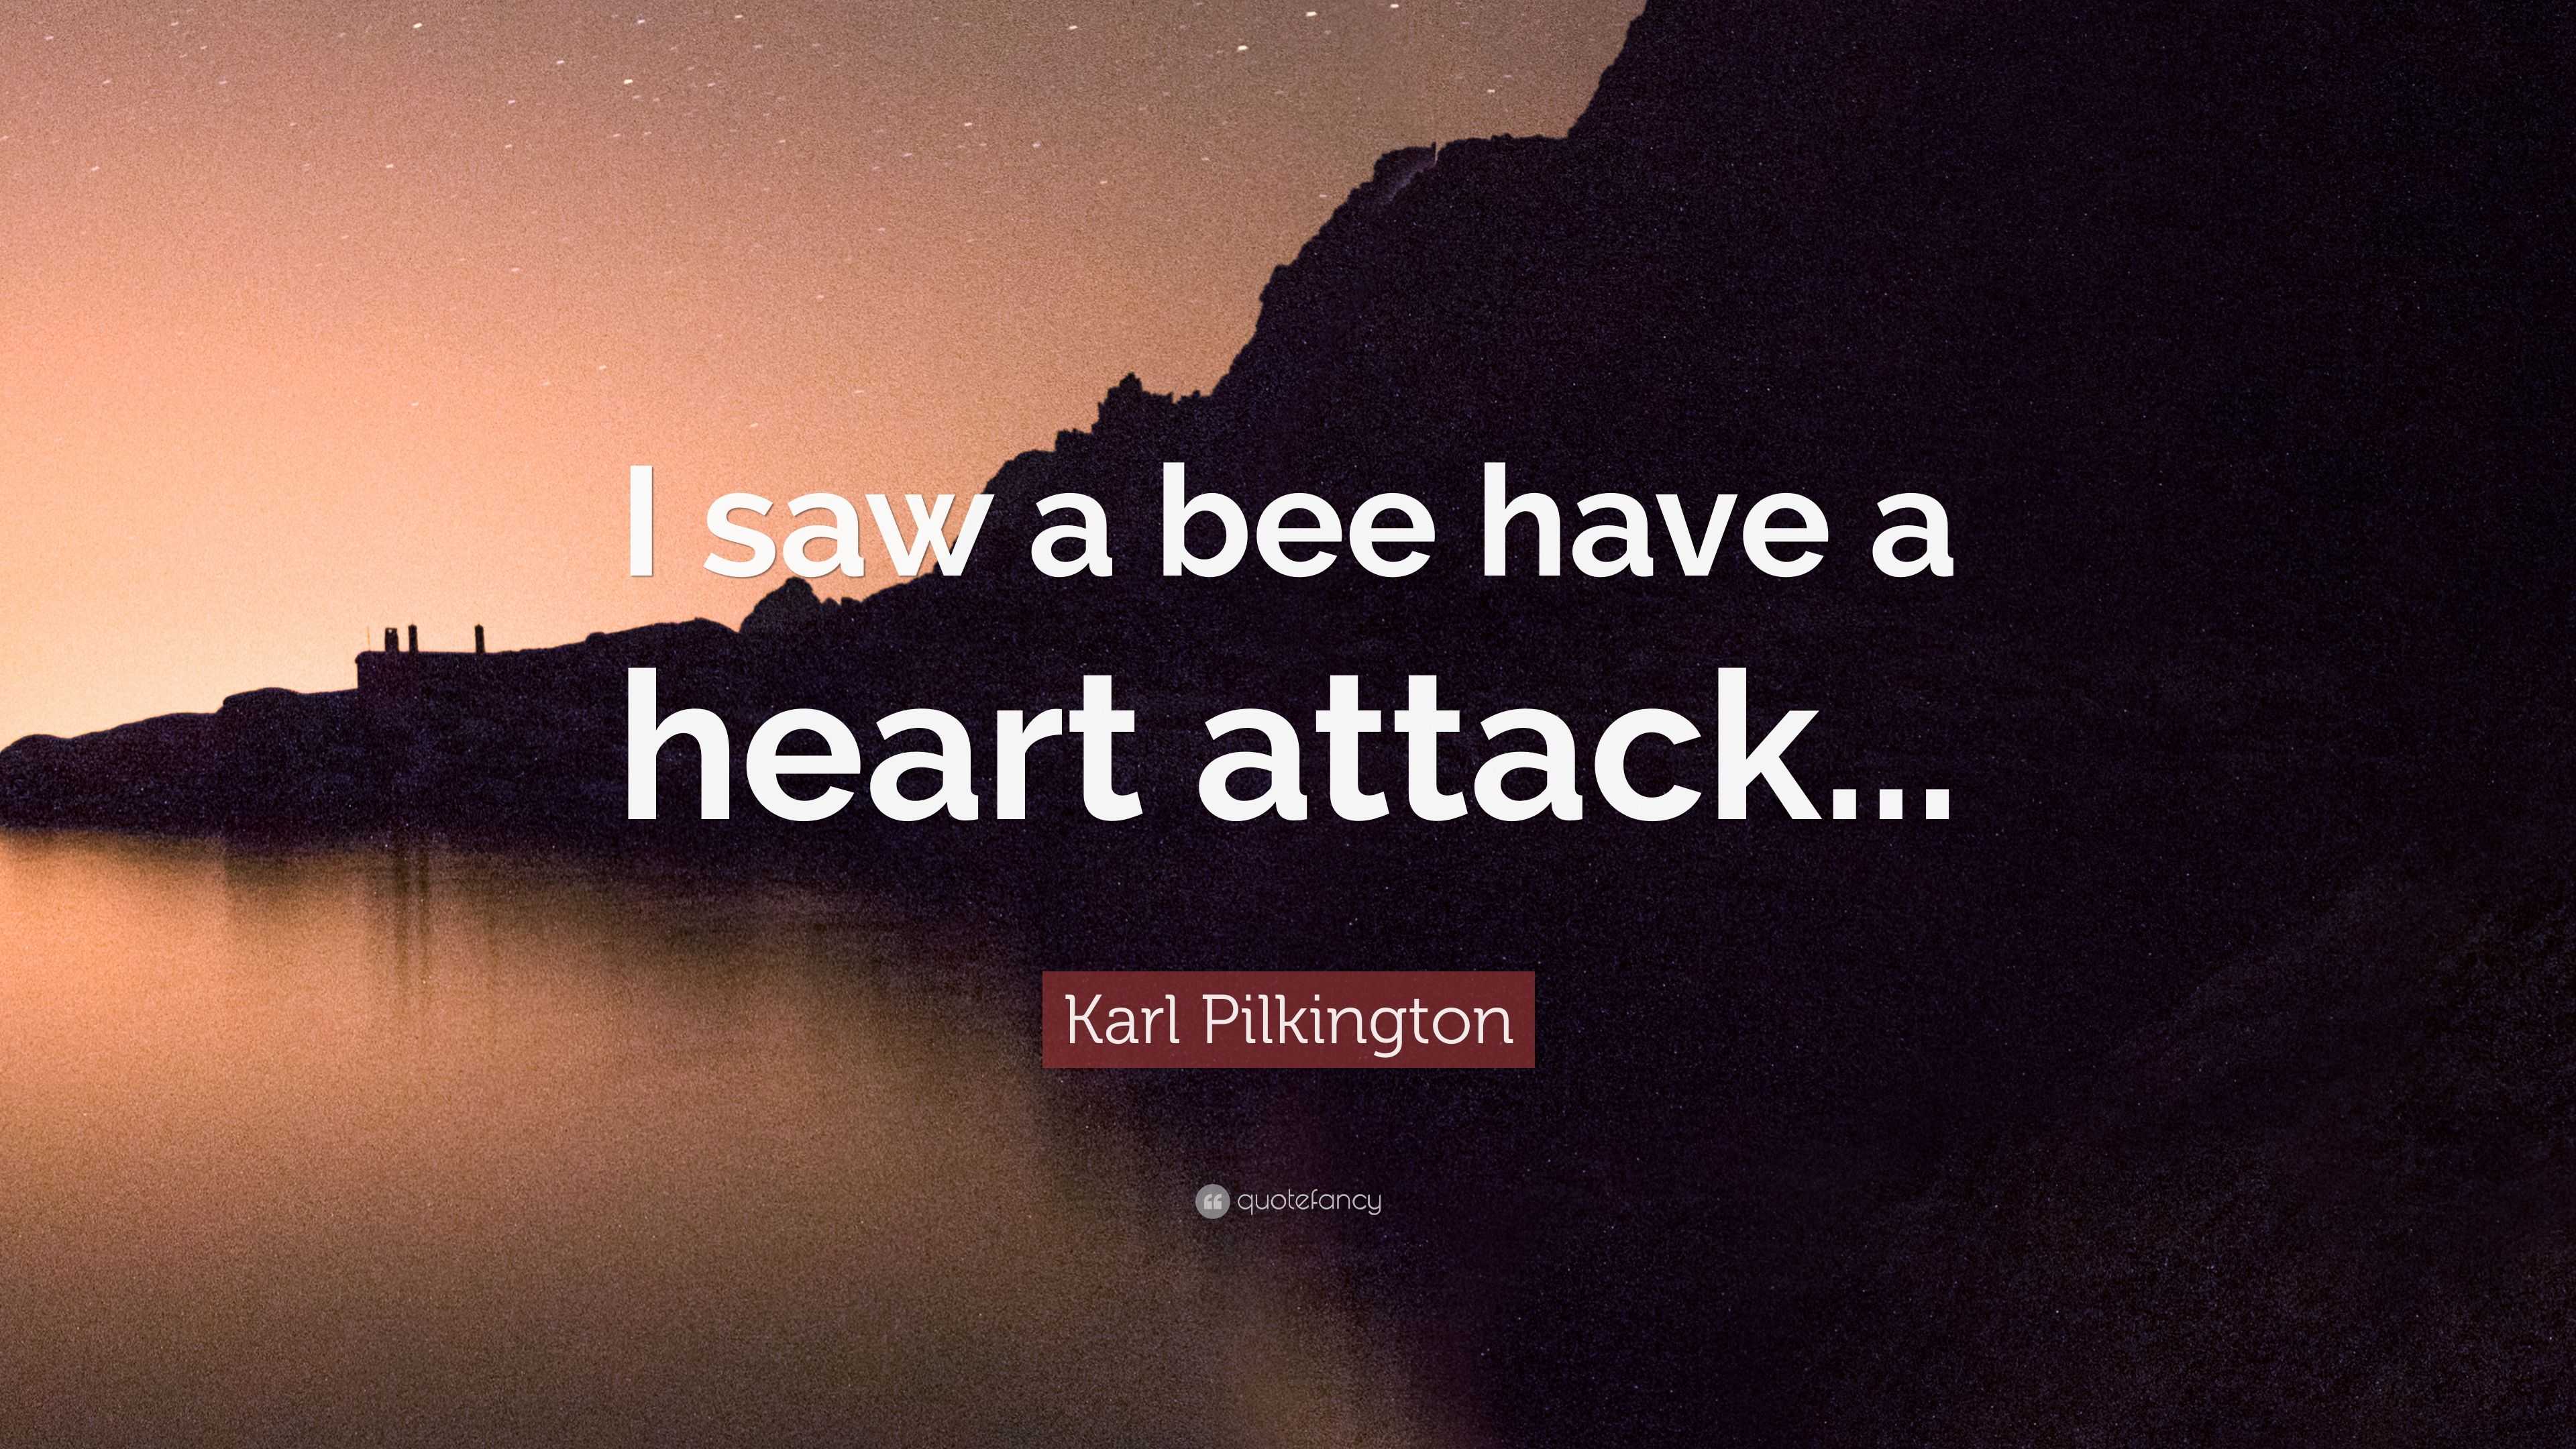 Karl Pilkington Quote “I saw a bee have a heart